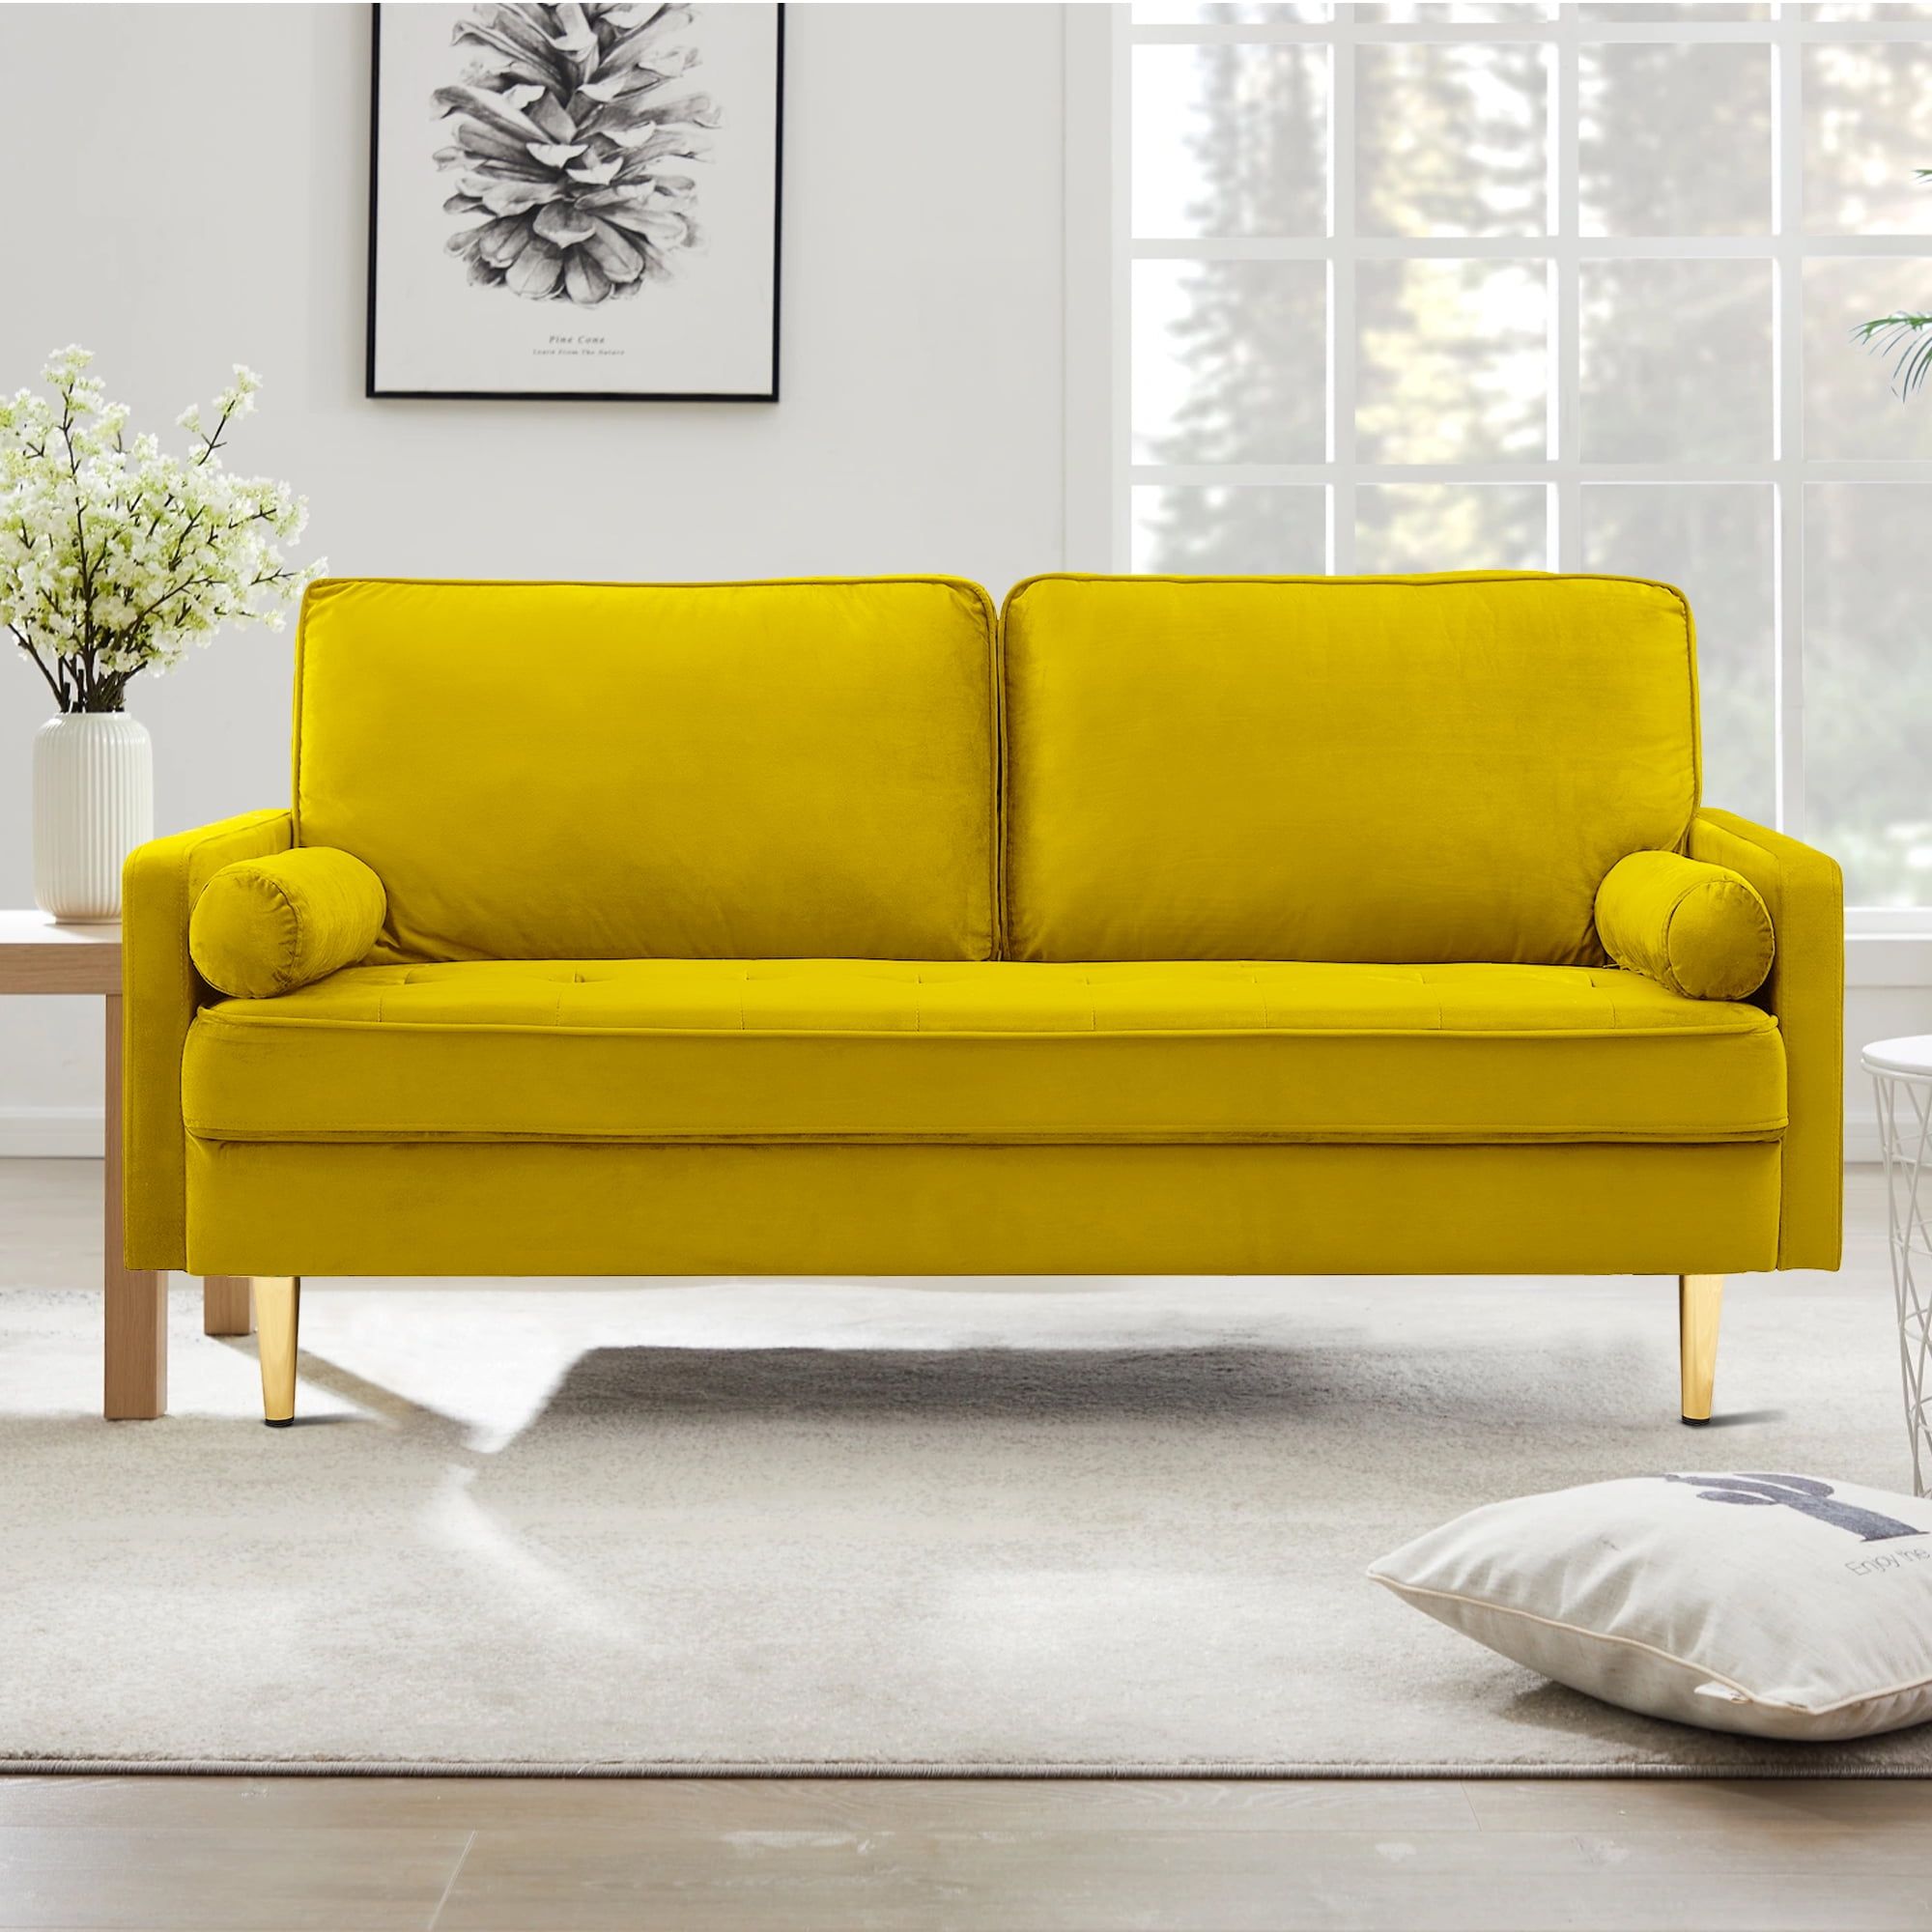 Kowilk Velvet Loveseat Sofa, 66.9'' Mid Century Modern Small Love Seats  With 2 Pillows & Golden Legs Comfy Couch For Living Room, Upholstered 2  Seater Sofa For Small Apartment ,yellow – Walmart Intended For Small Love Seats In Velvet (Photo 12 of 15)